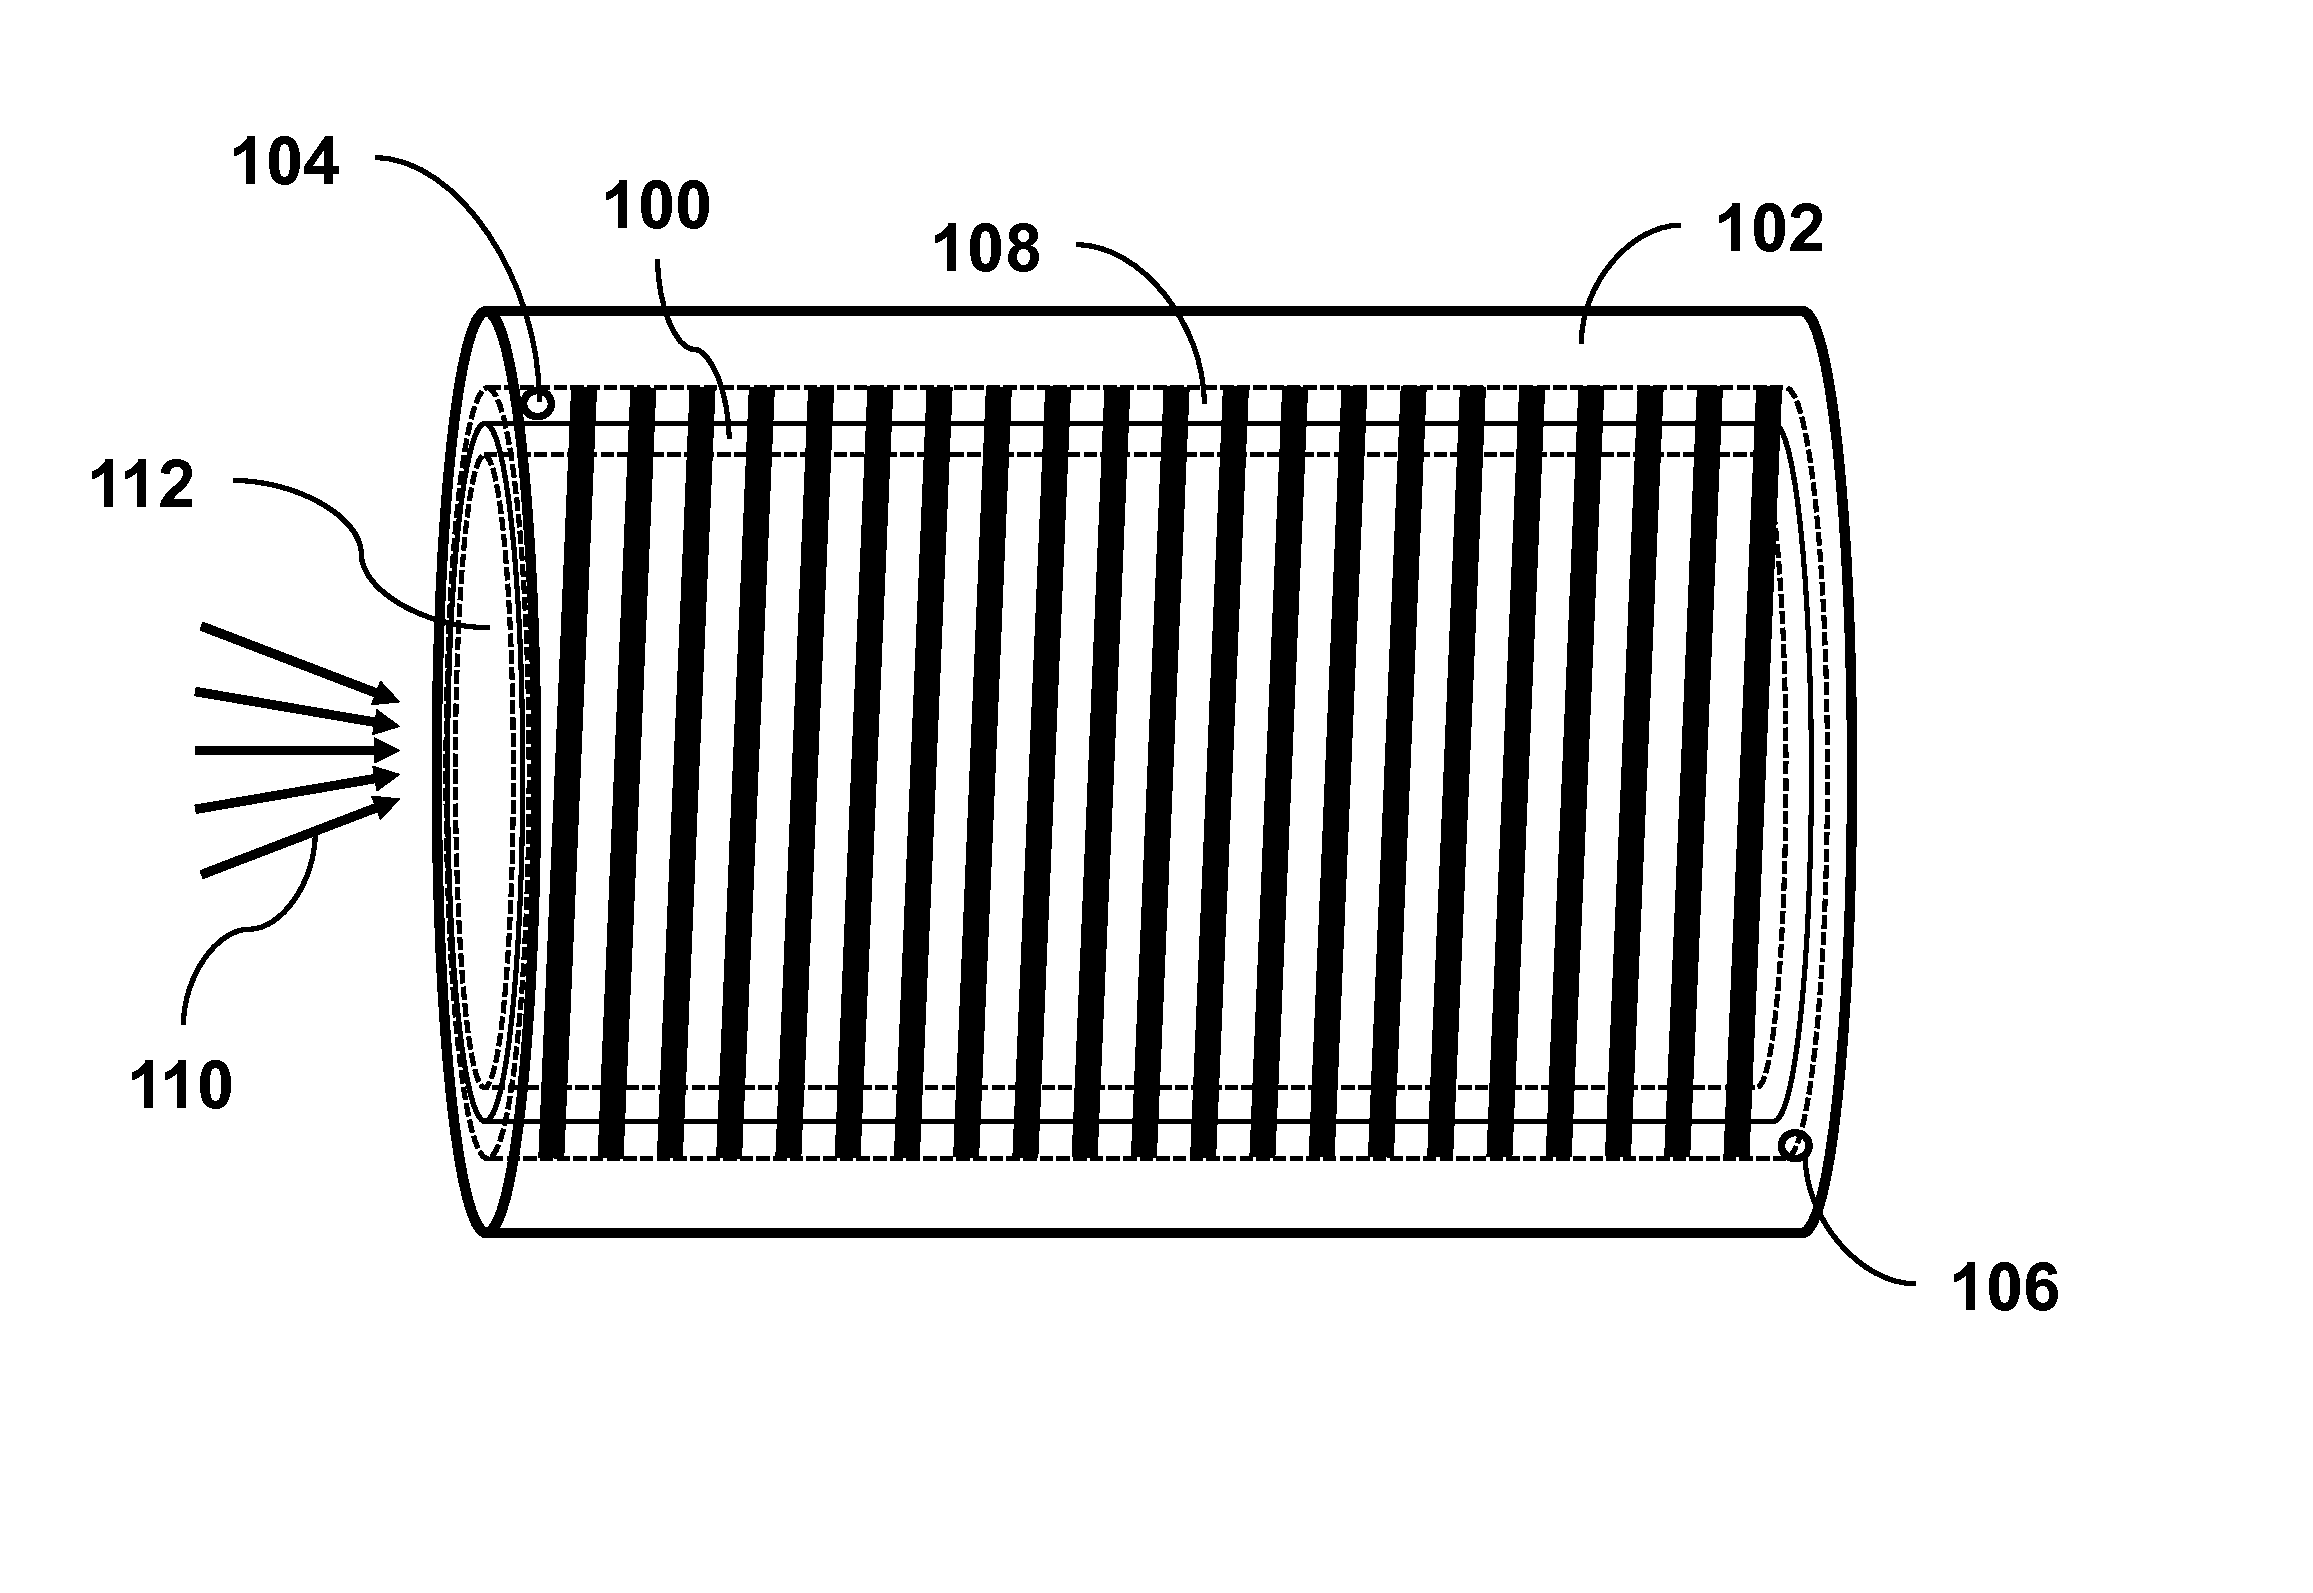 Solar Absorber for Concentrated Solar Power Generation